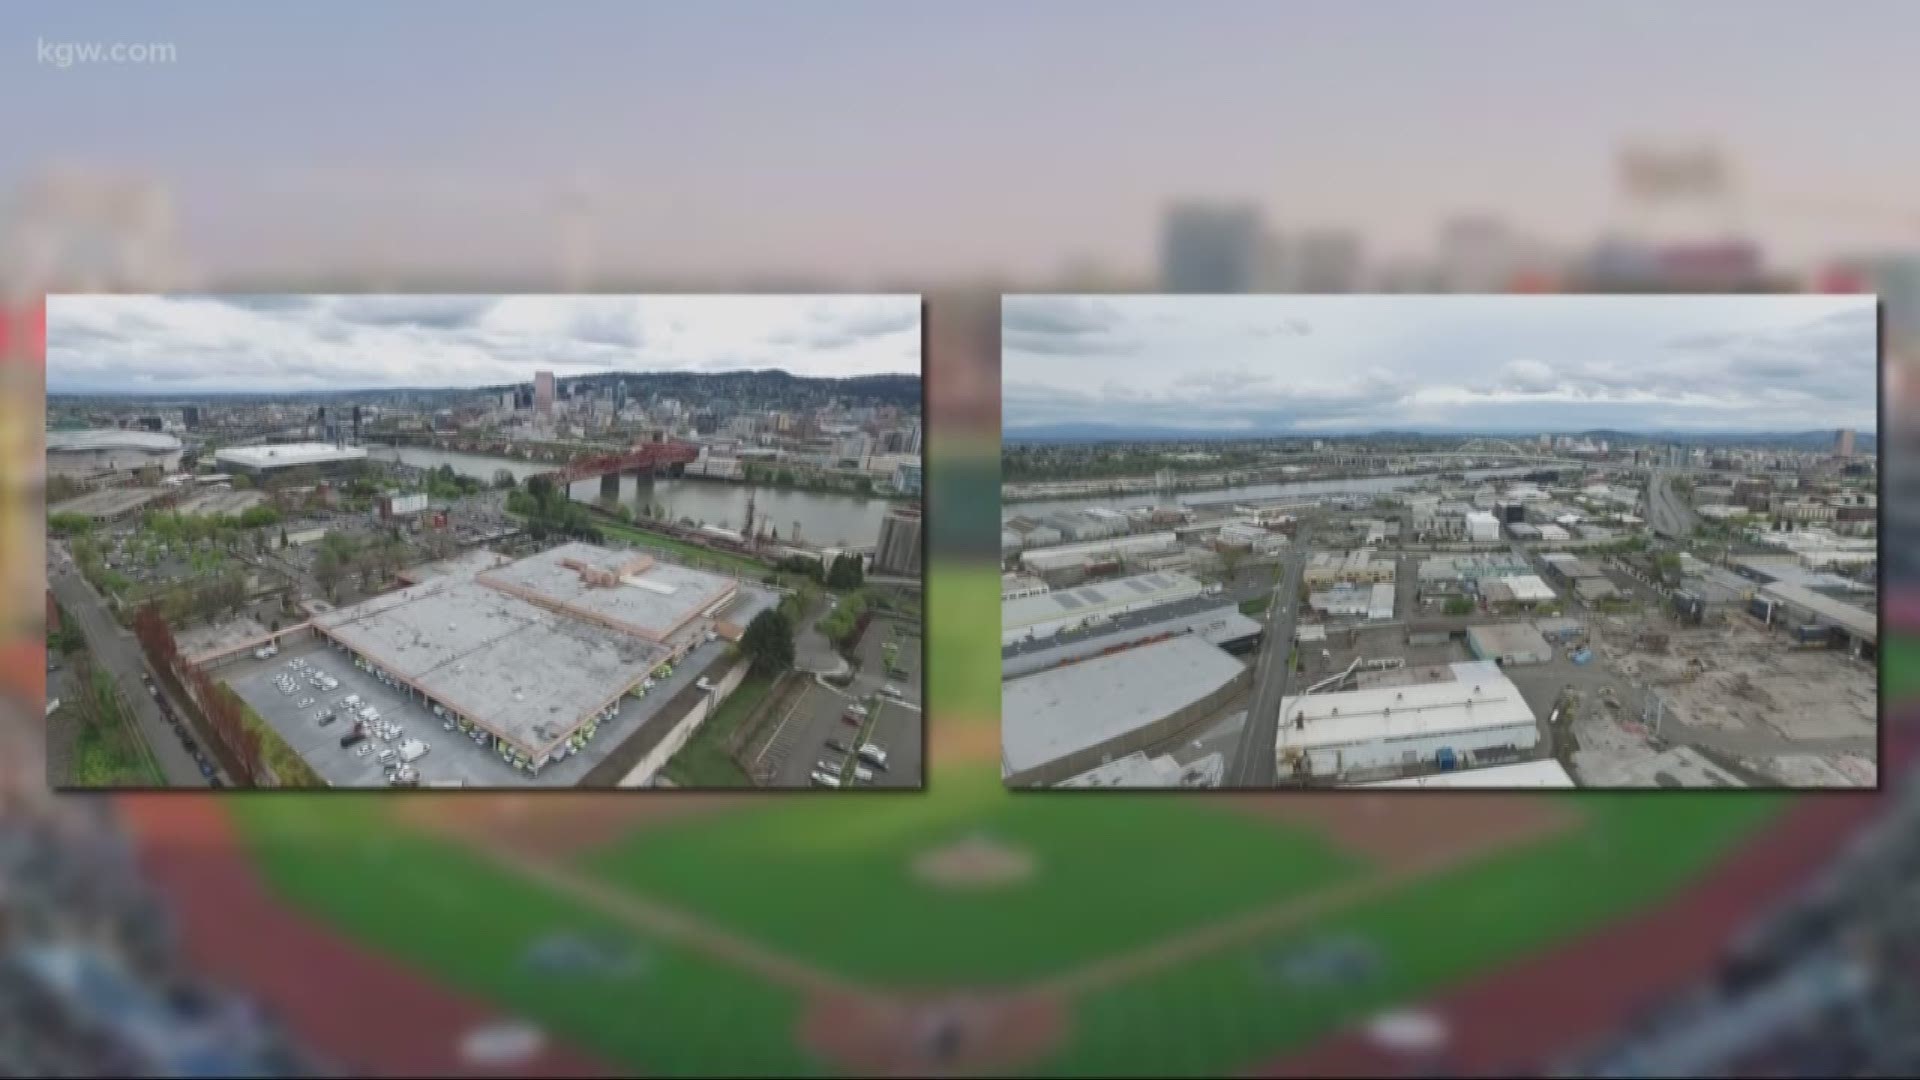 Portland Diamond Project is eyeing a site near the Moda Center and another in the Northwest Industrial area for a baseball stadium and massive apartment complex. 